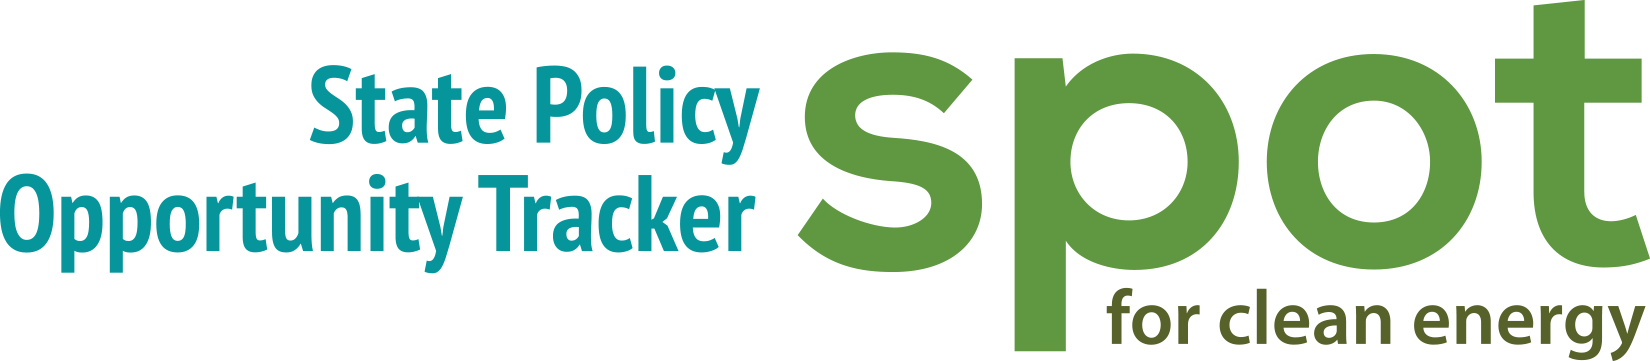 an image of a logo that says State Policy Opportunity Tracker SPOT.